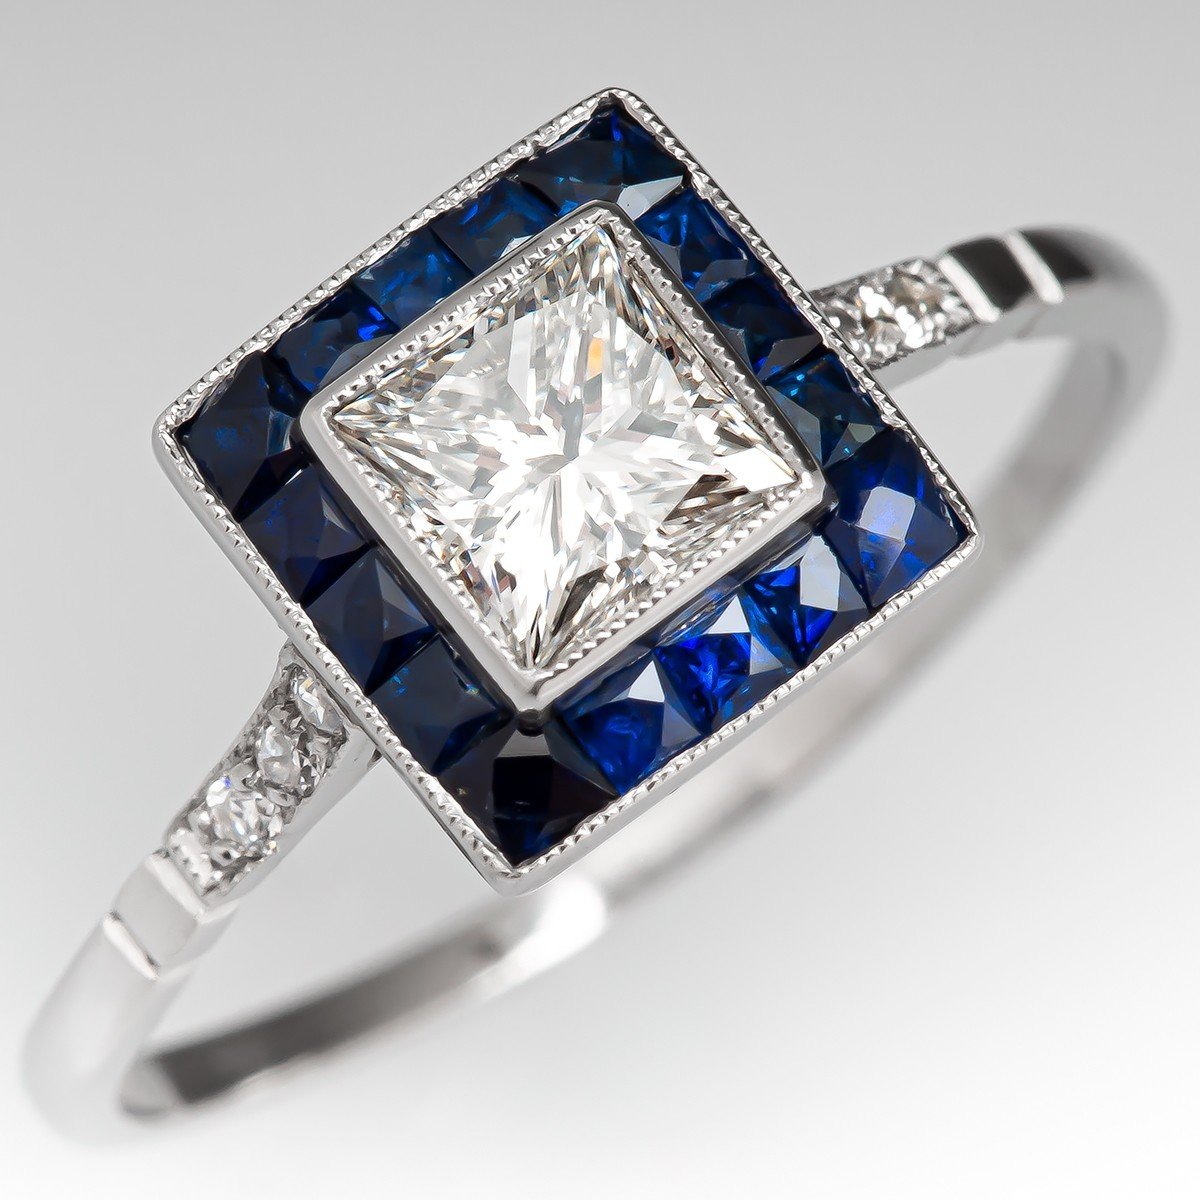 14k White Gold Ring With 5 Princess Cut Sapphires And Diamonds – Michael's  Custom Jewelers on Cape Cod